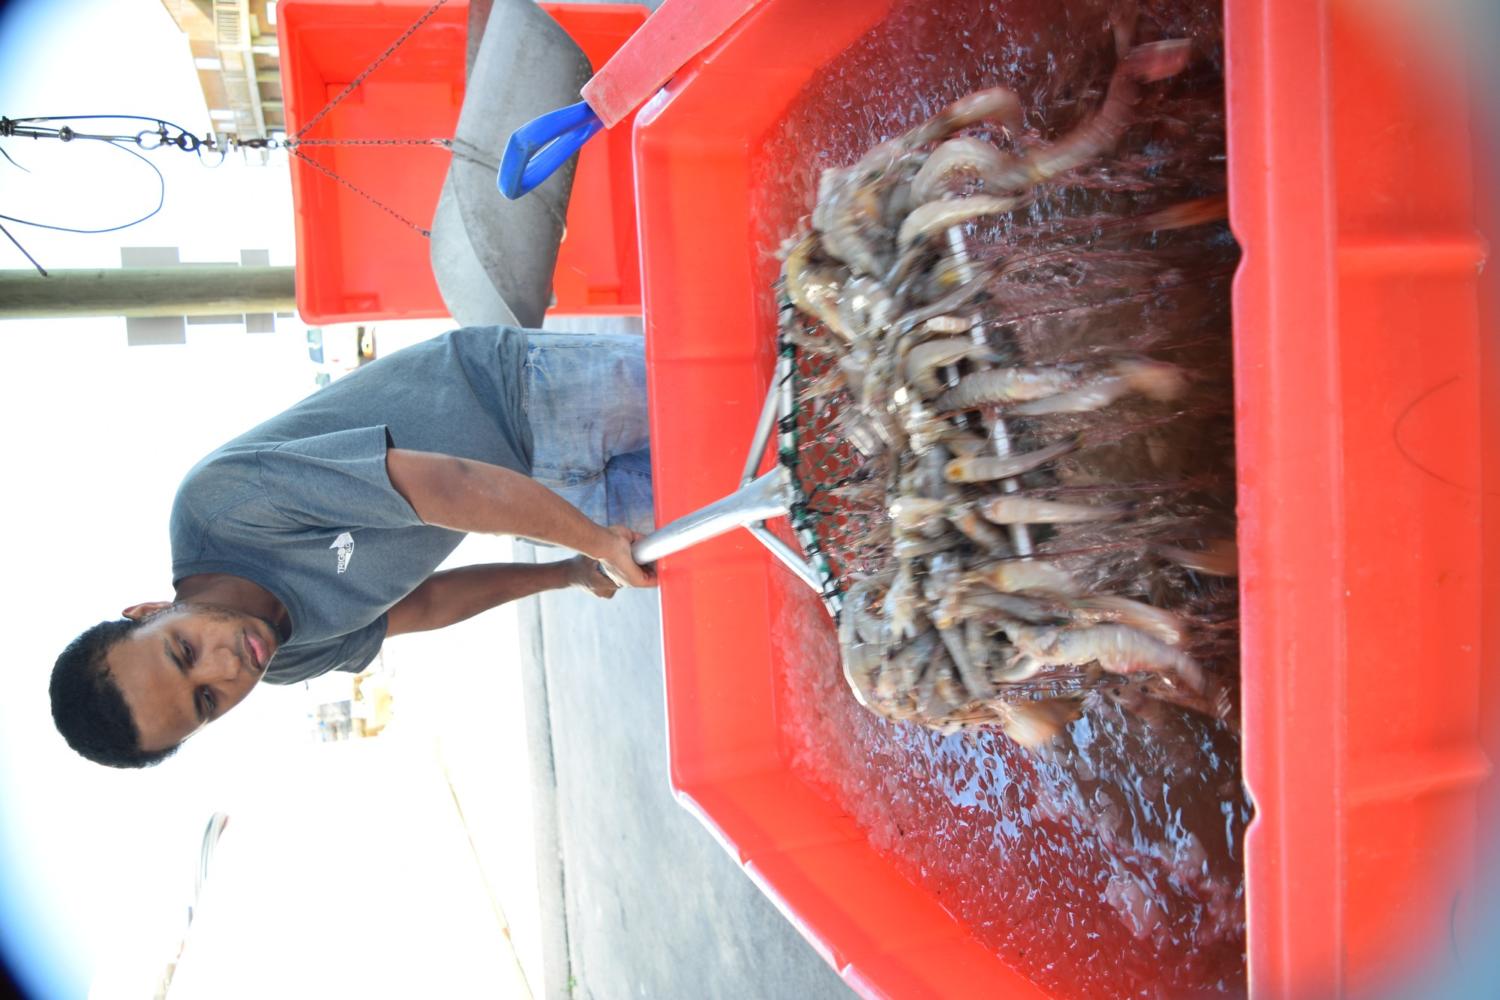 Tee Bran, from Alabama,  sifts through shrimp at Blanchards Seafood. Fishermen regularly process shrimp offloaded from boats during after an evening haul. Photo credit: Nick Arceneaux